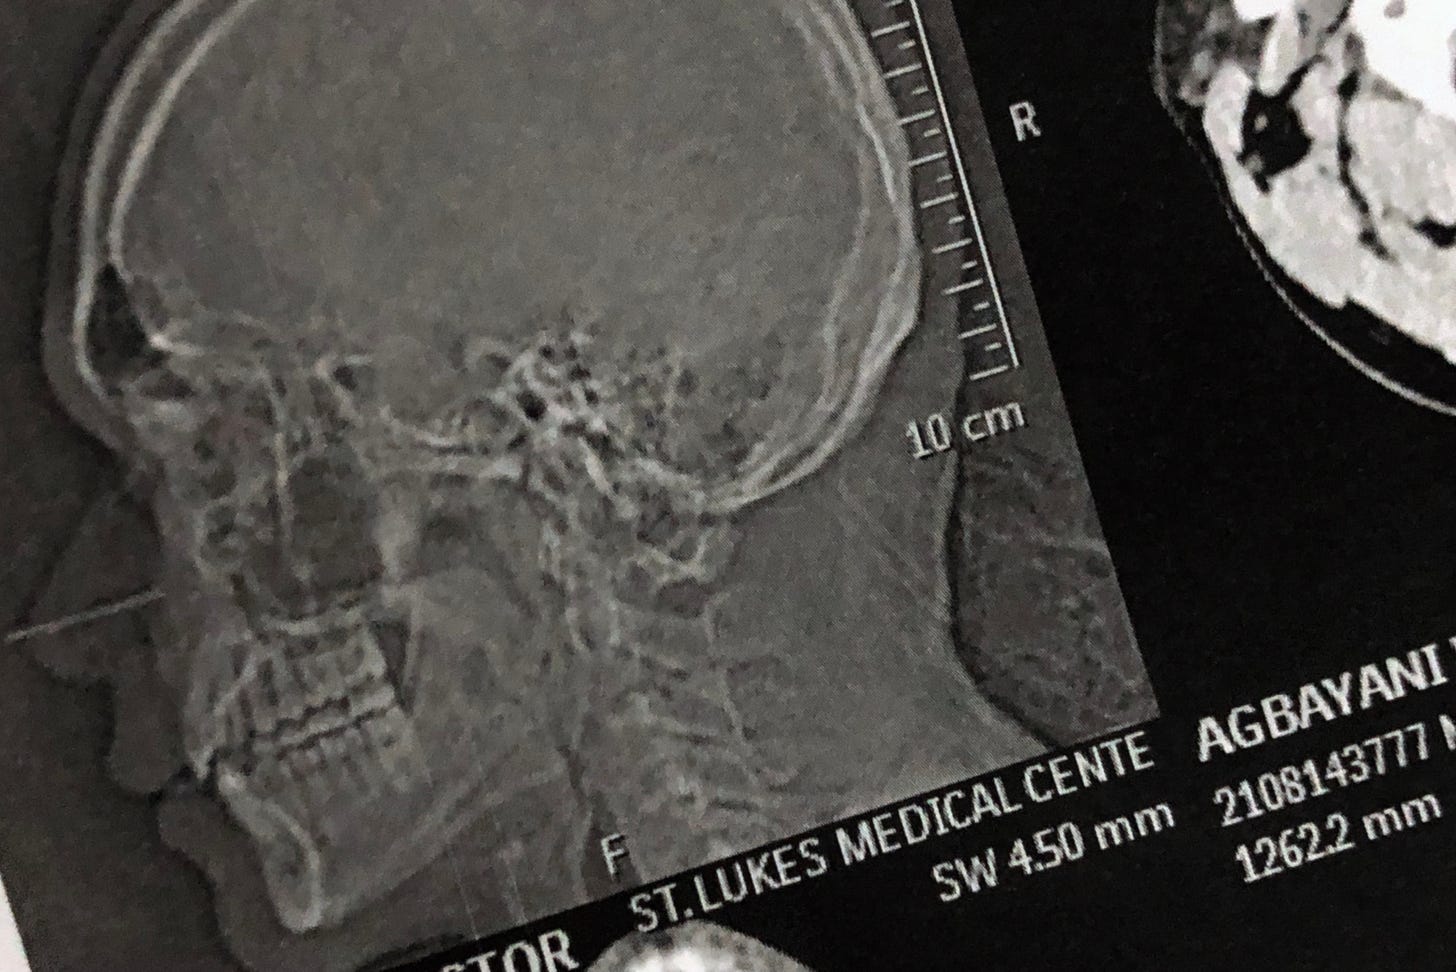 X-ray and CT scan of author's head.